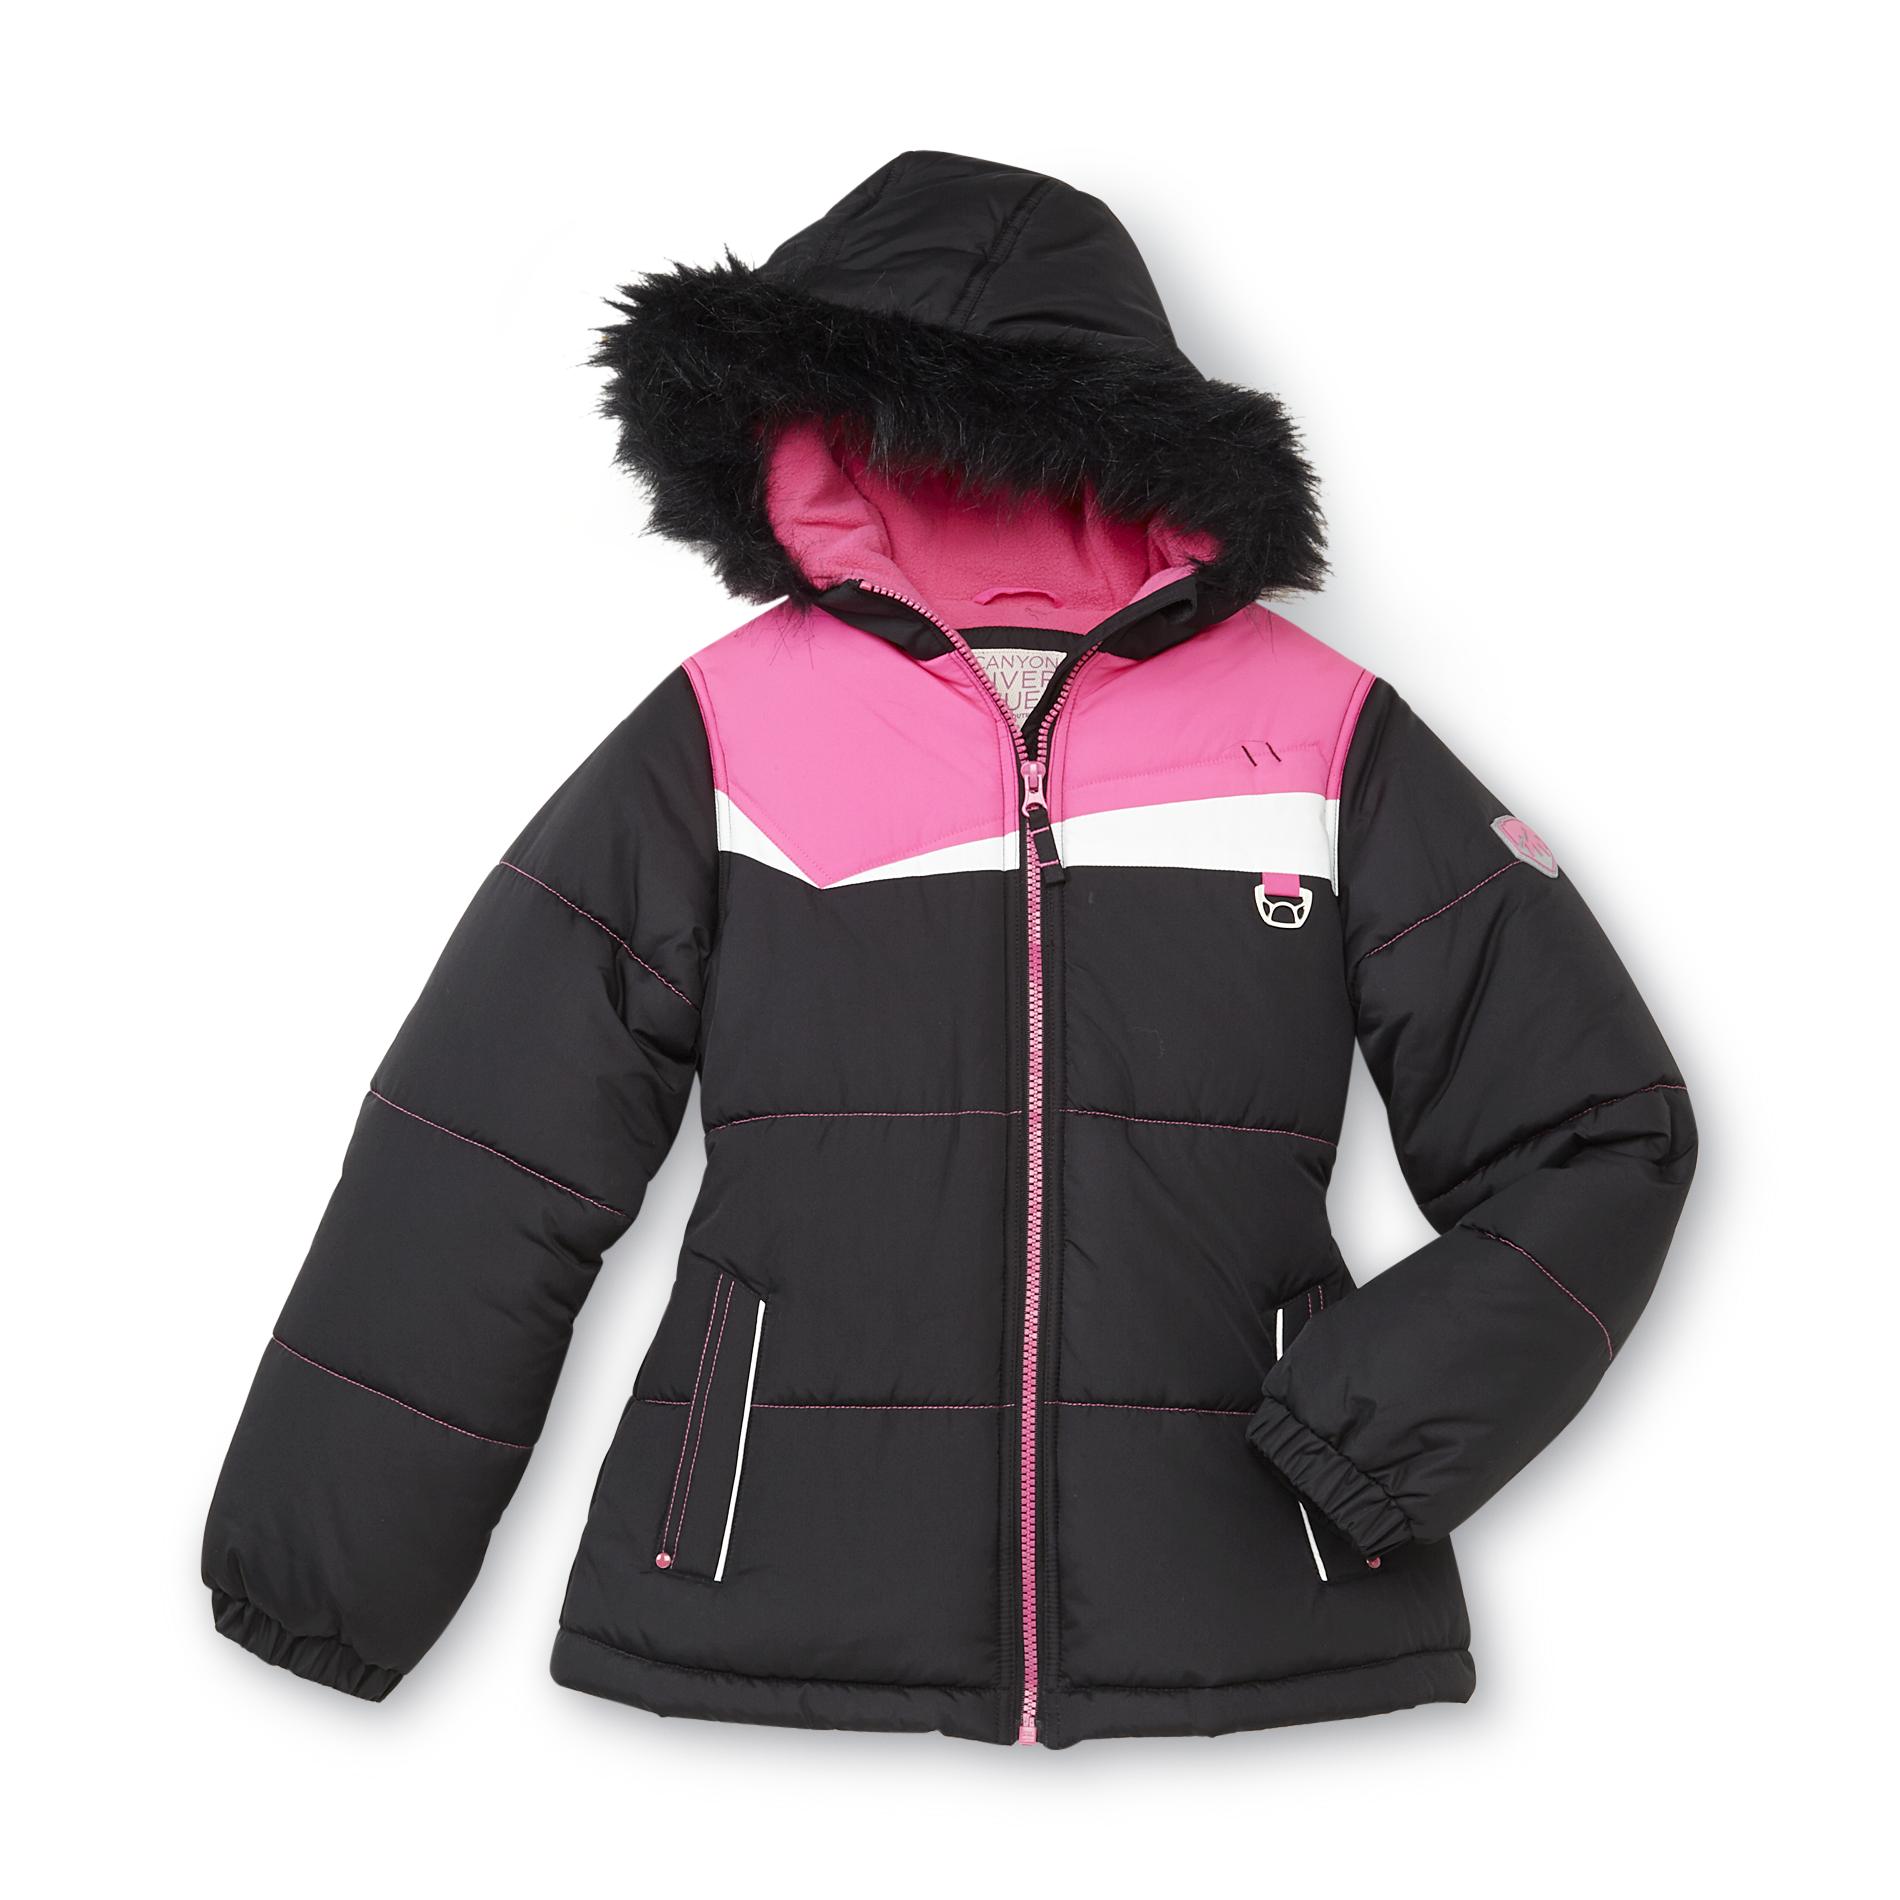 Canyon River Blues Girl's Hooded Winter Jacket